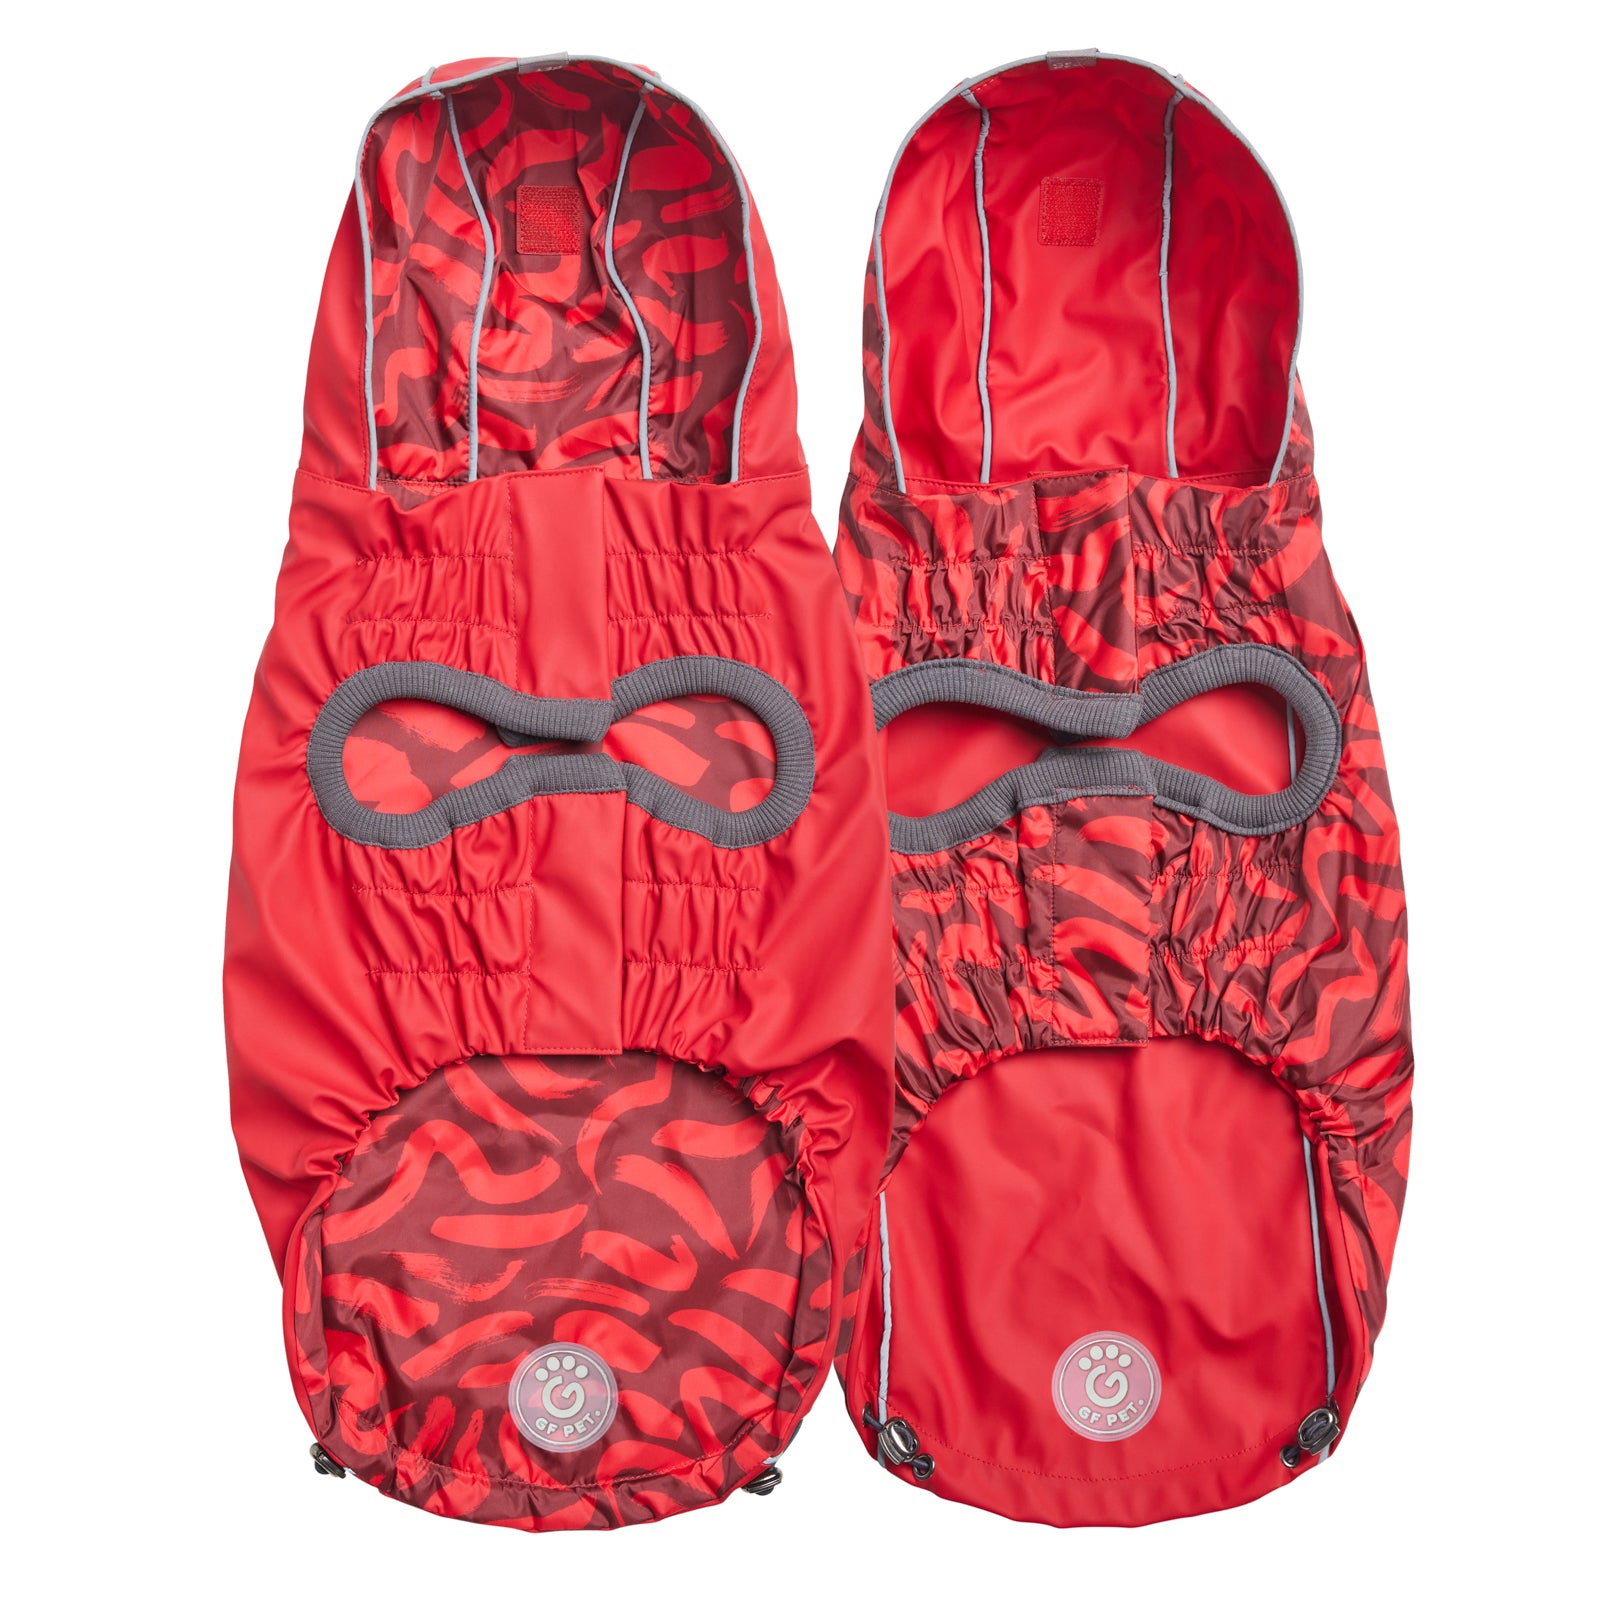 two views of the underside of a reversible raincoat for dogs. One shows the bright red side of the coat and the other shows the bright red and dark red with abstract wavy pattern print side of the coat